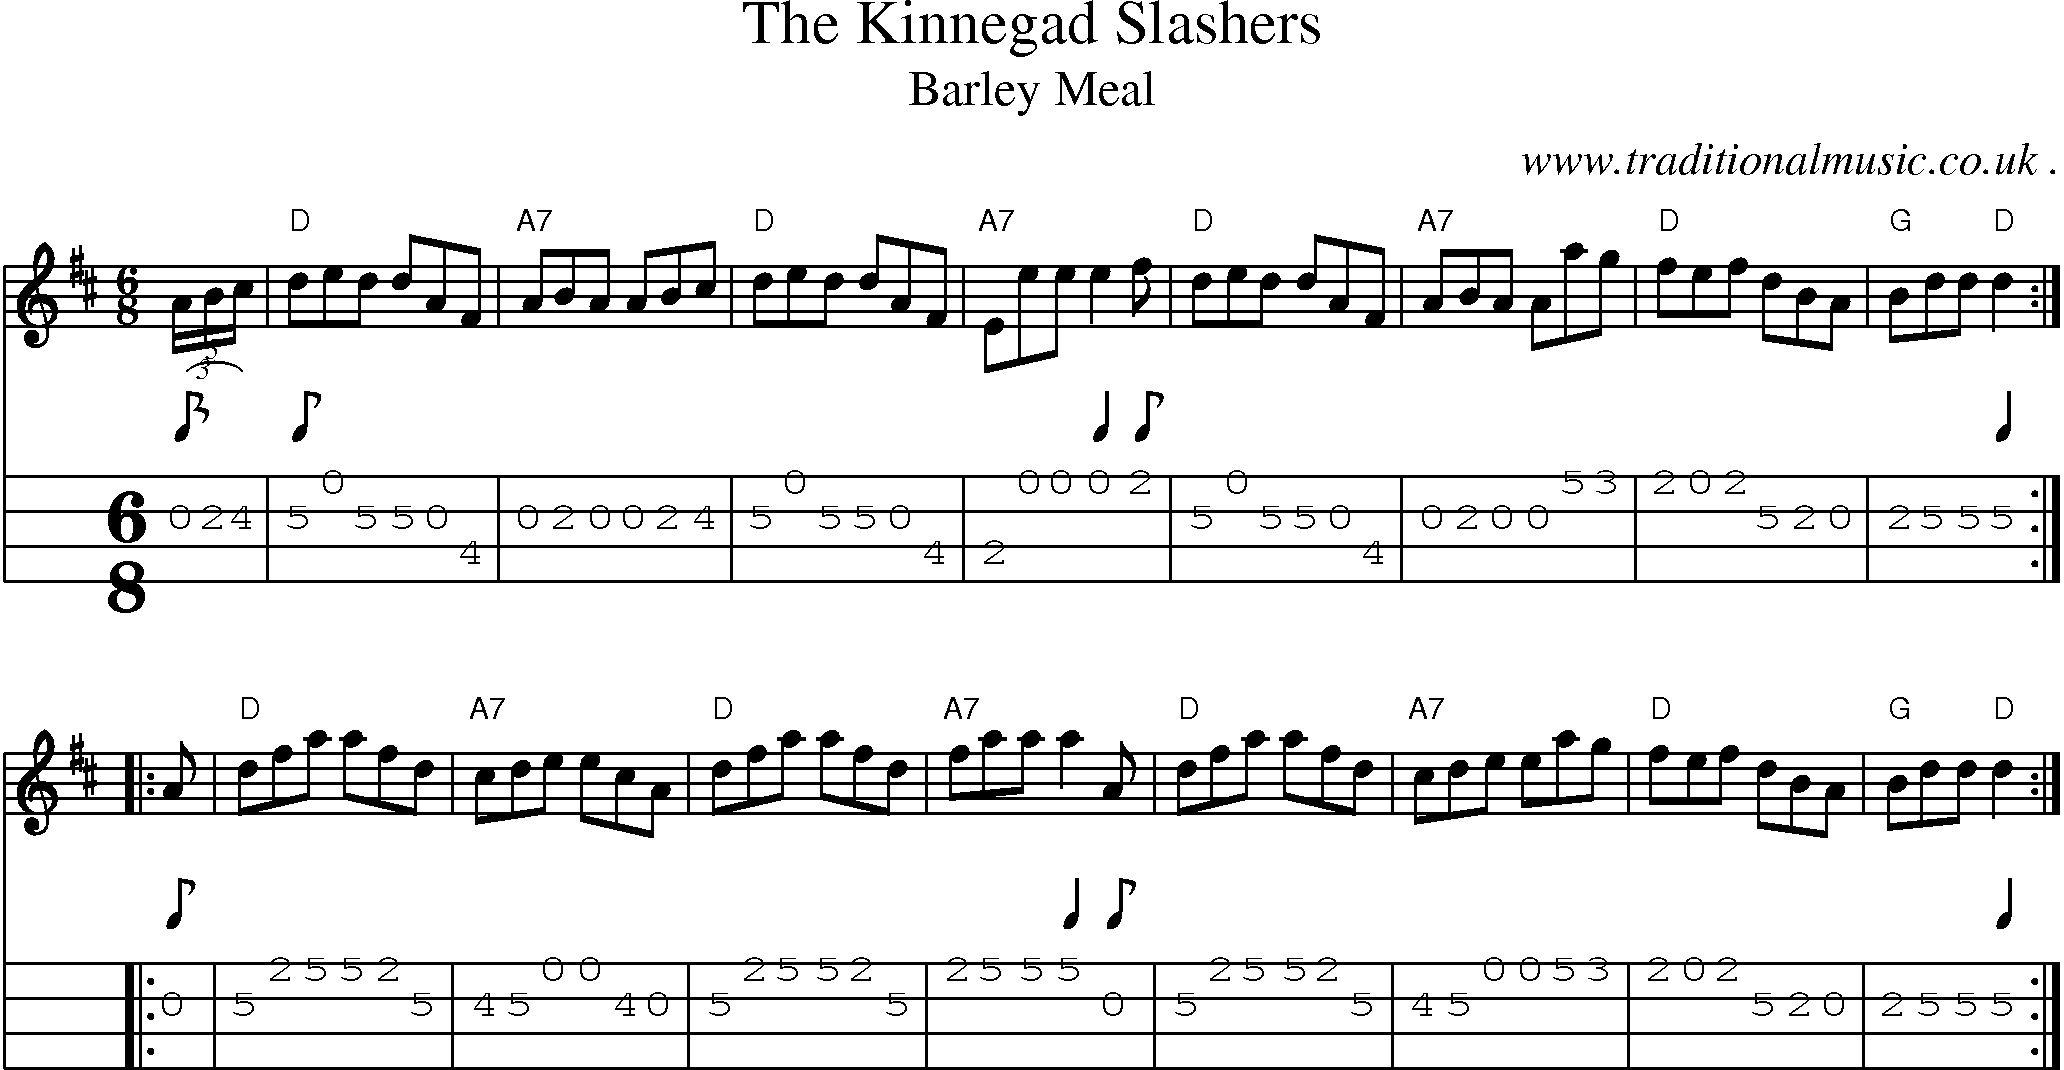 Sheet-music  score, Chords and Mandolin Tabs for The Kinnegad Slashers